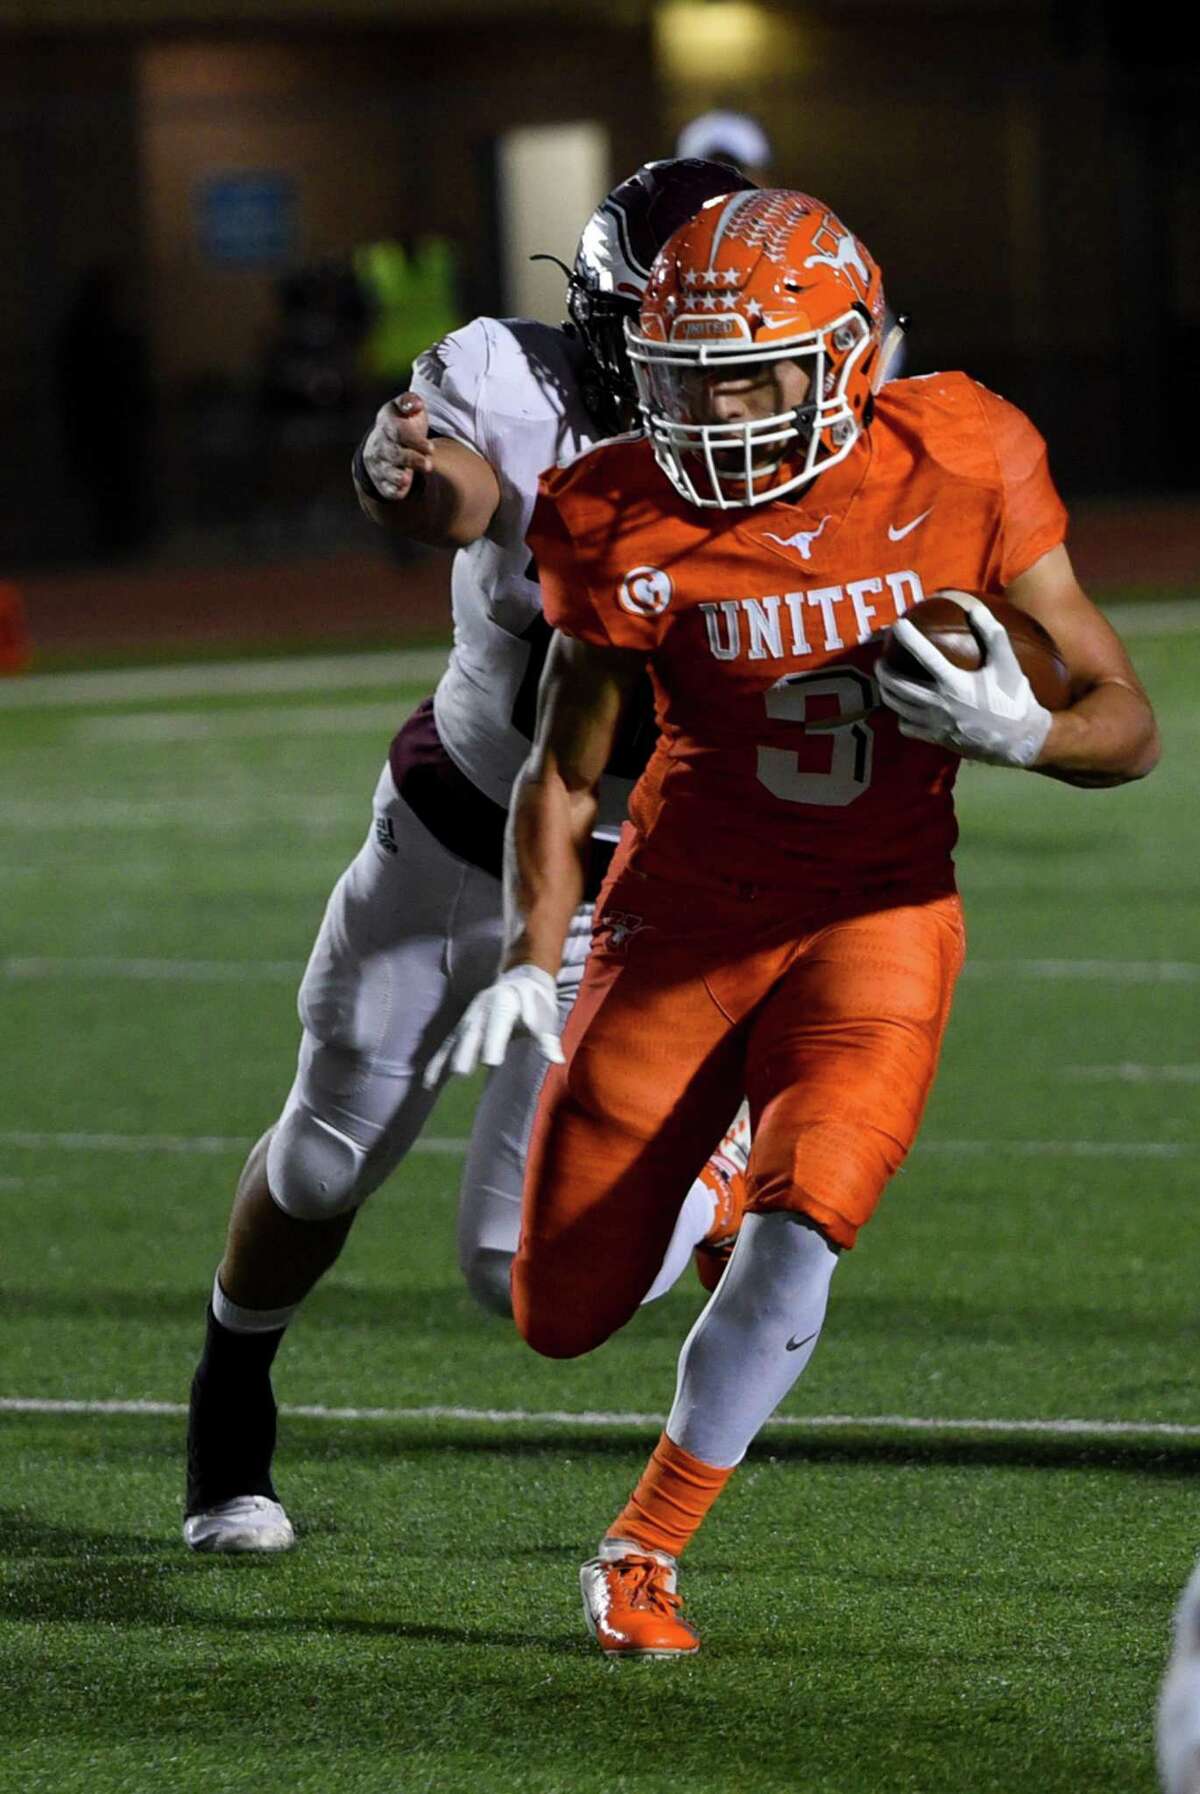 United senior Jerry Gonzalez has rushed for 1,707 yards and 19 touchdowns through 11 games in his first and only varsity season.